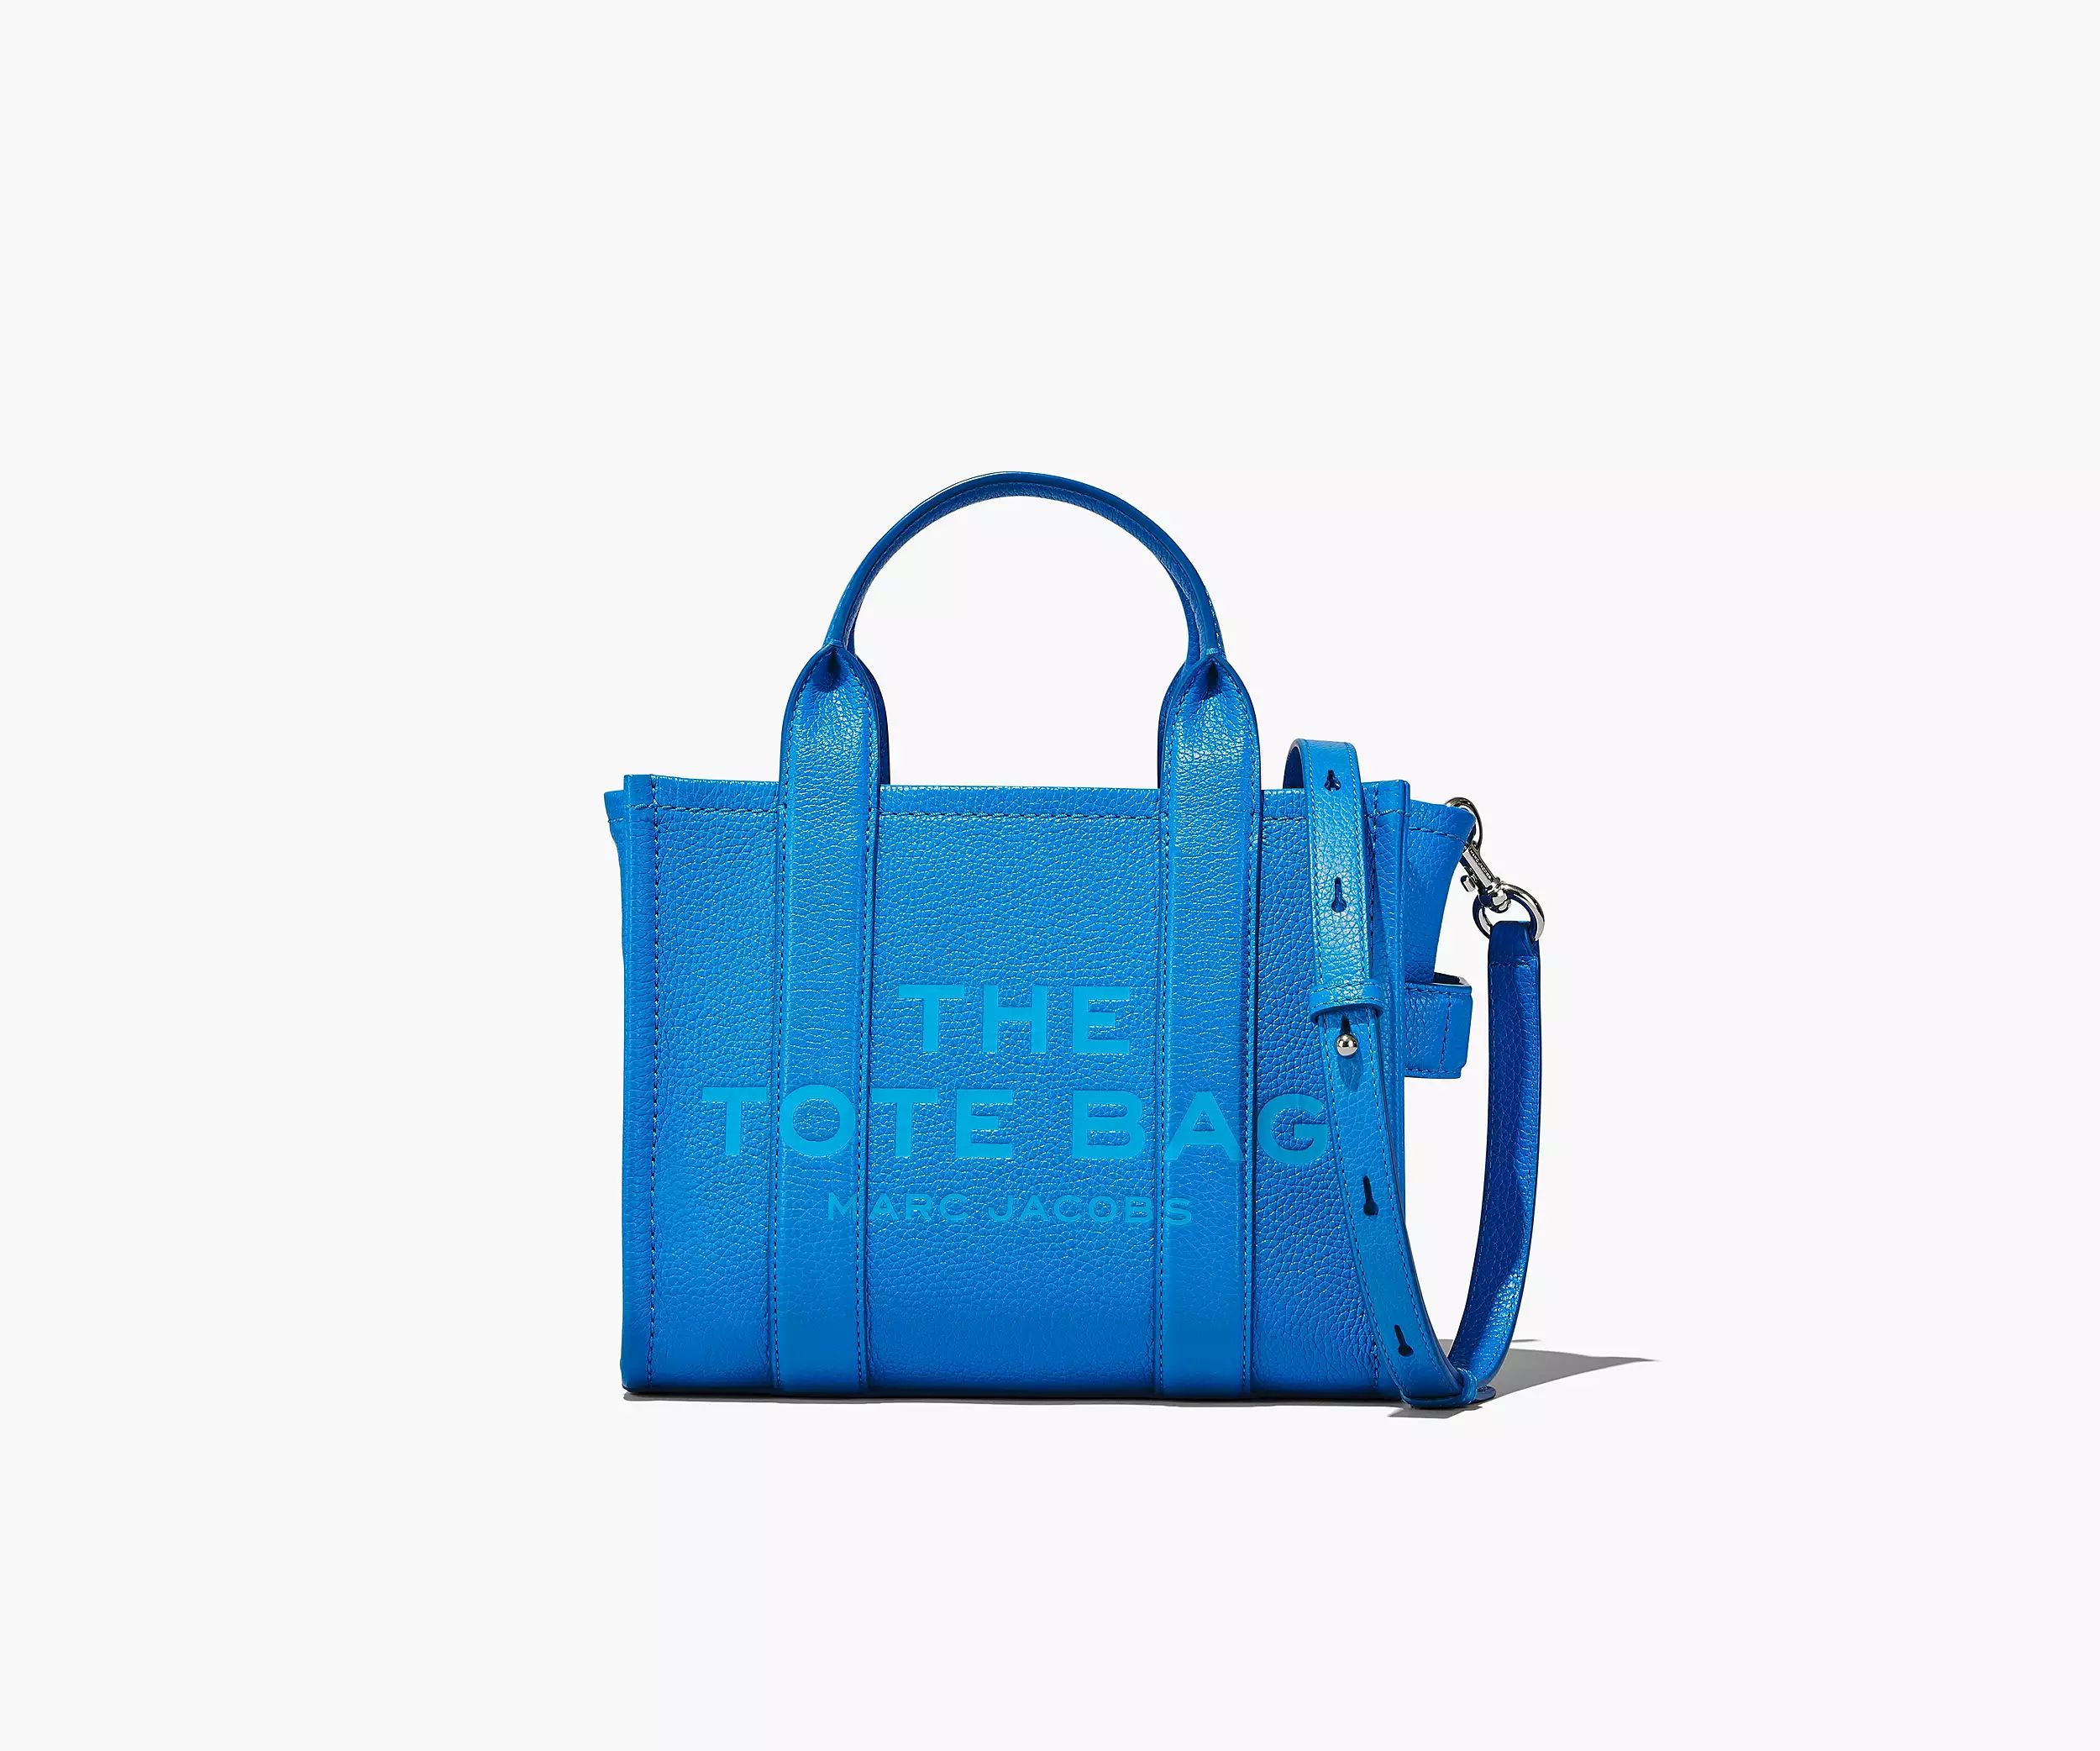 The Leather Mini Tote Bag | Marc Jacobs